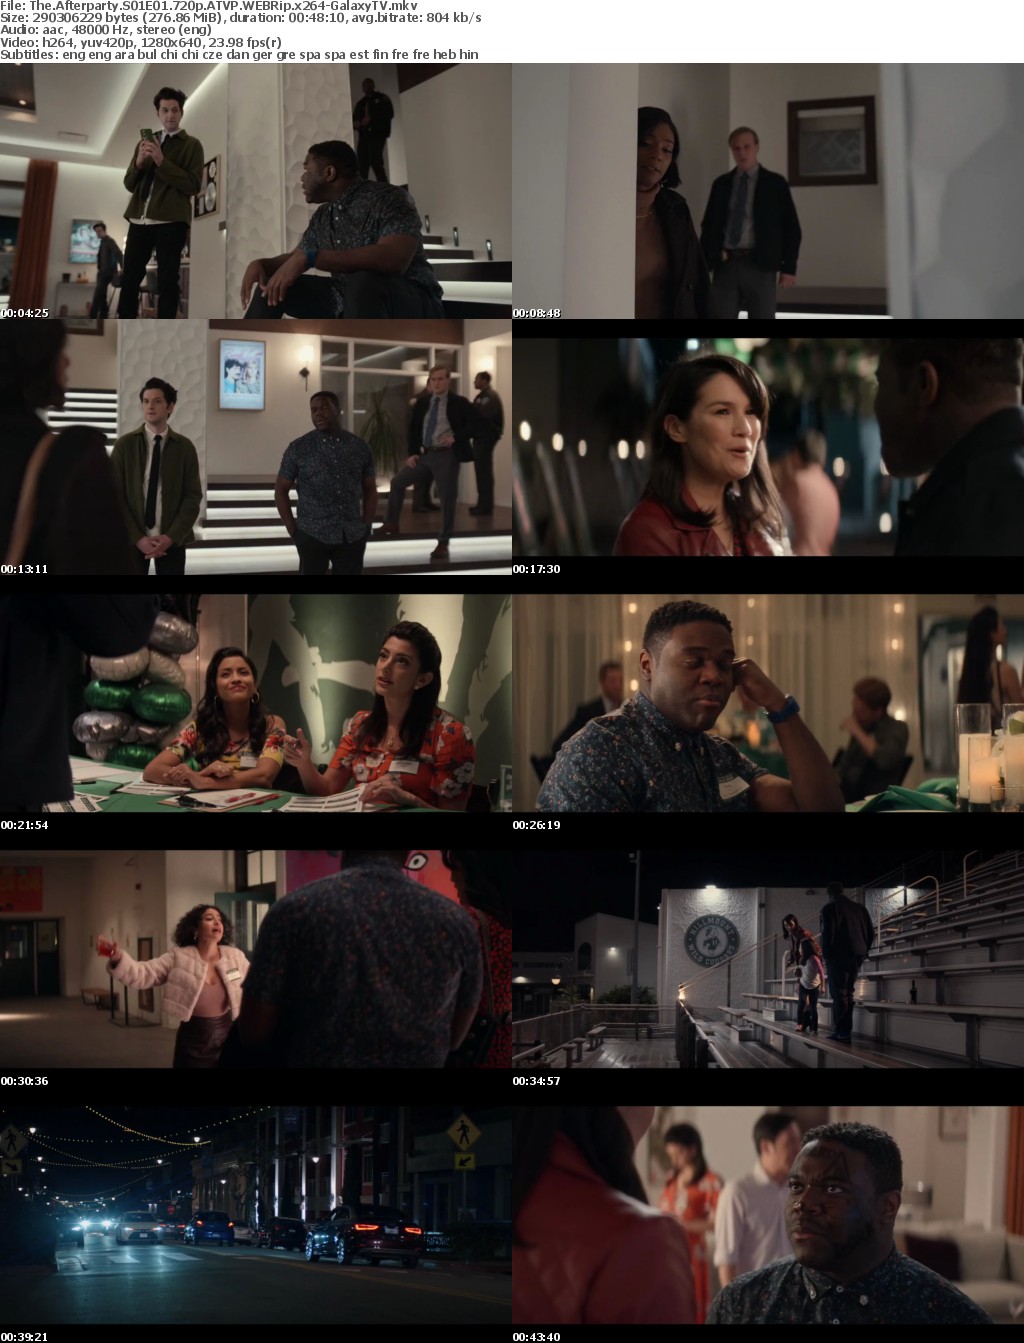 The Afterparty S01 COMPLETE 720p ATVP WEBRip x264-GalaxyTV